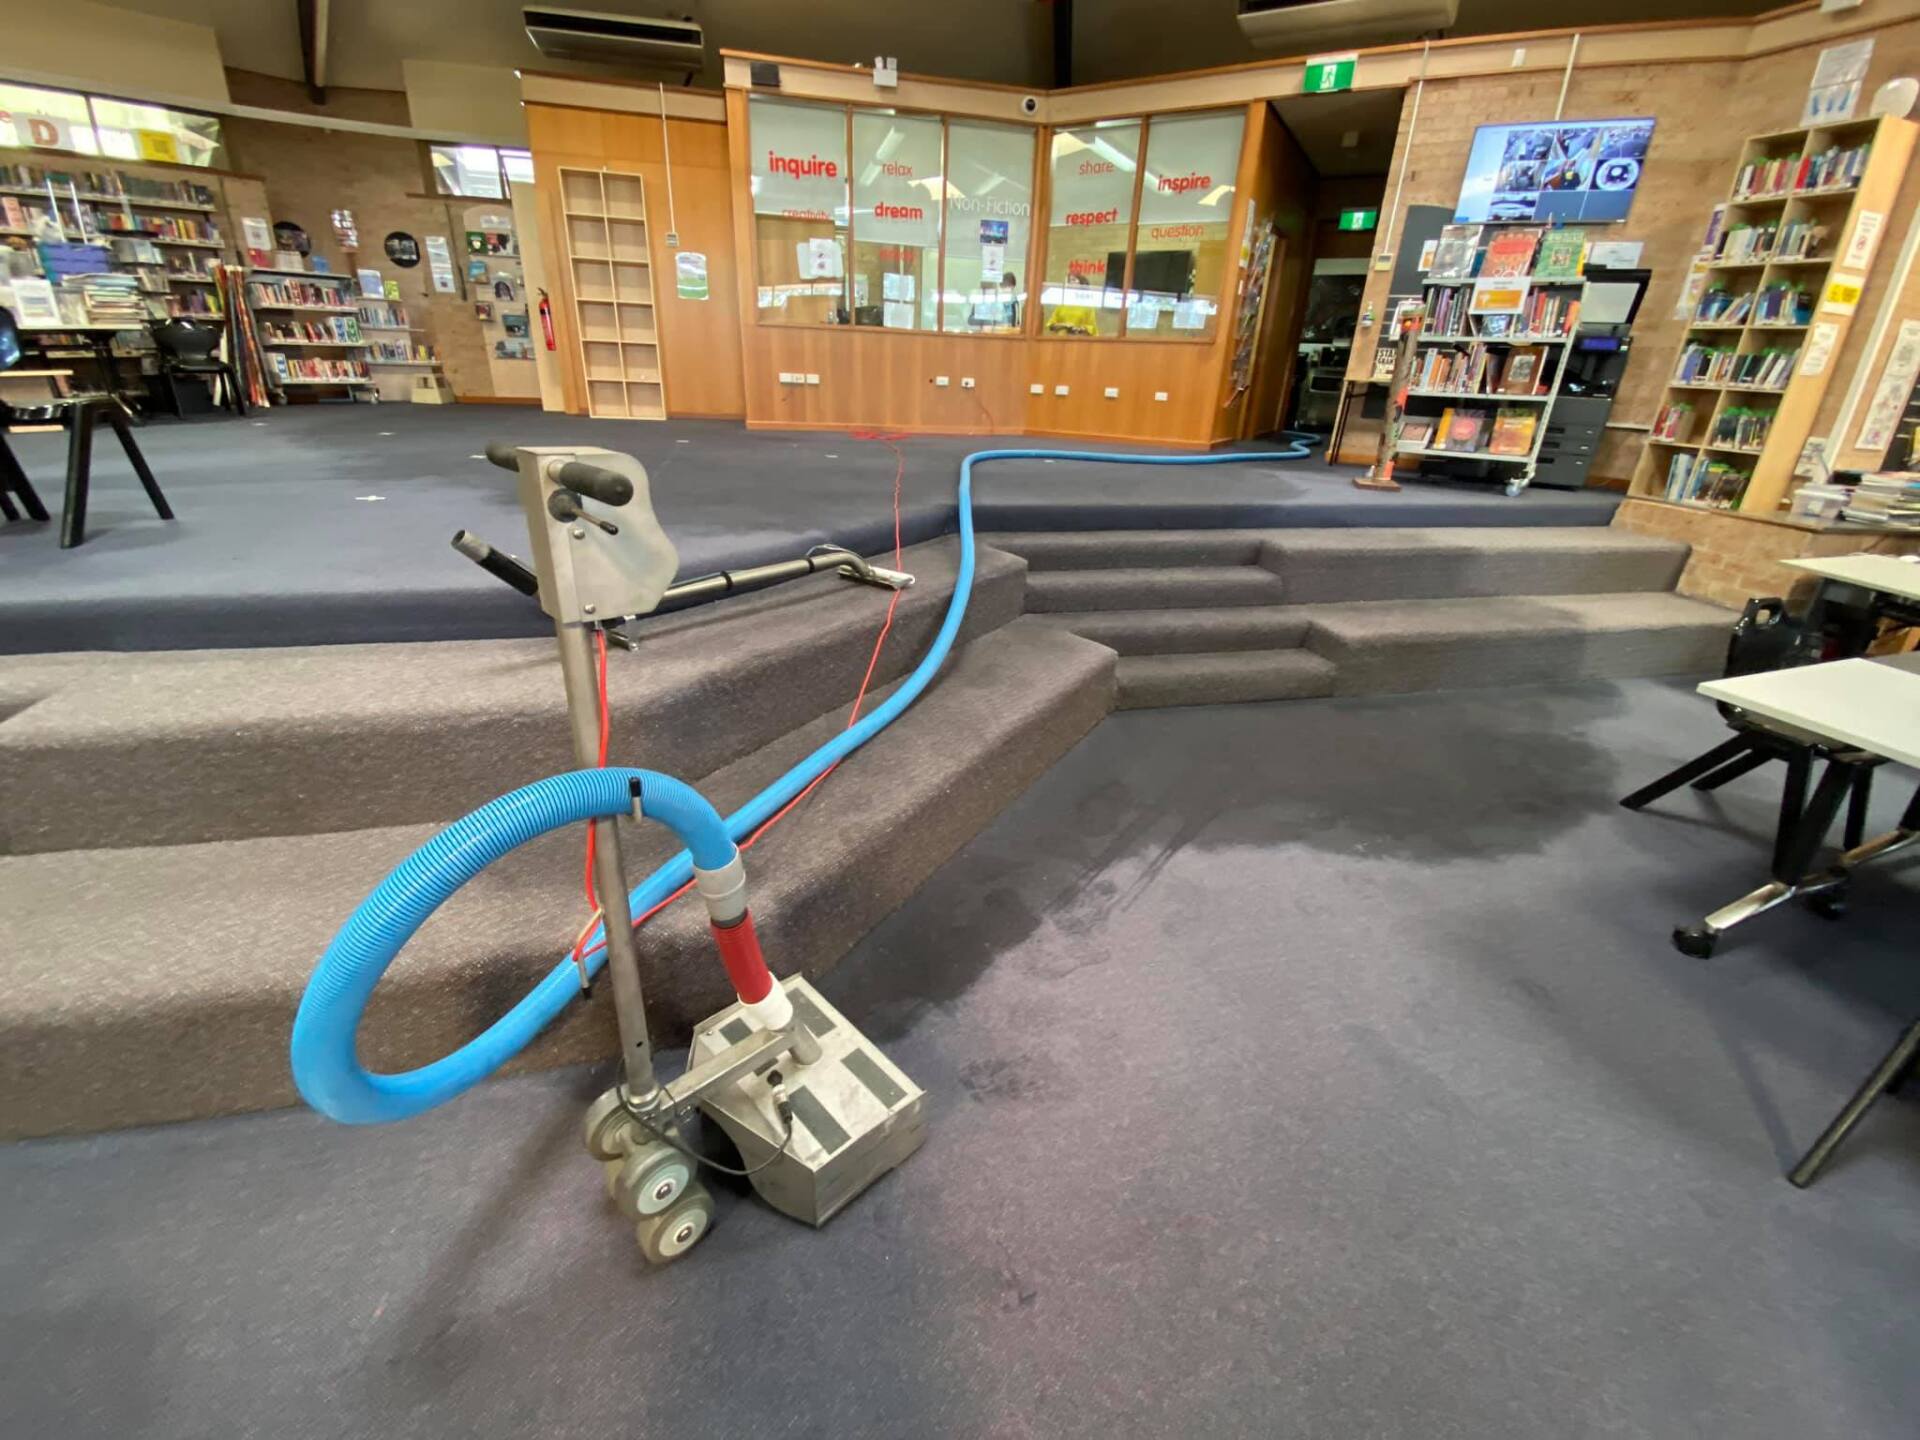 Professional Carpet Cleaning — Carpet Cleaners in Shellharbour, NSW